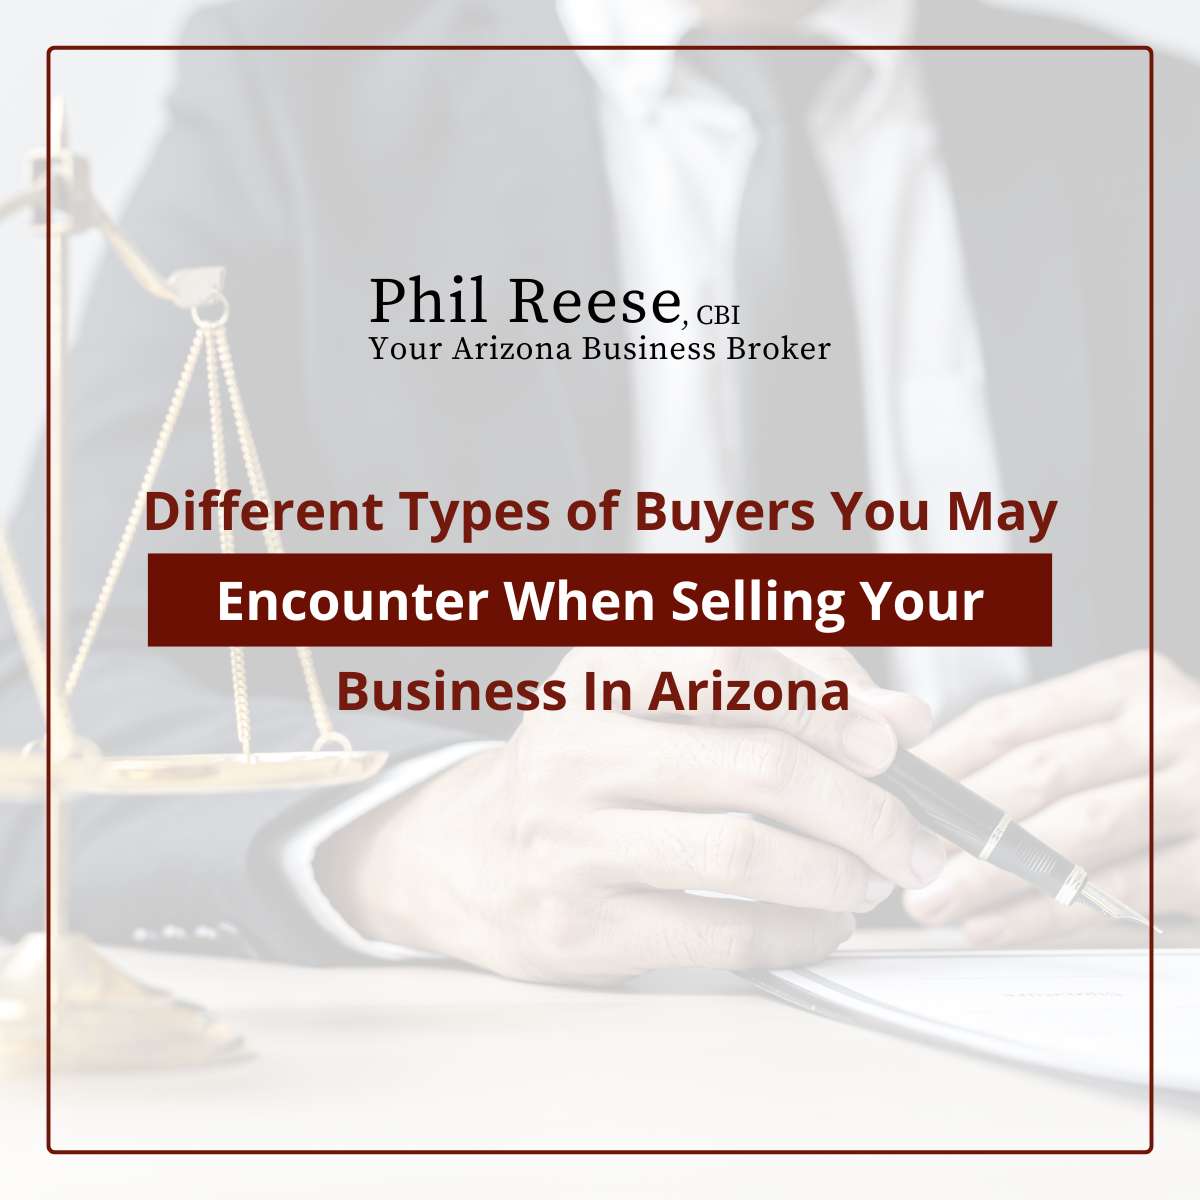 Different Types of Buyers You May Encounter When Selling Your Business In Arizona